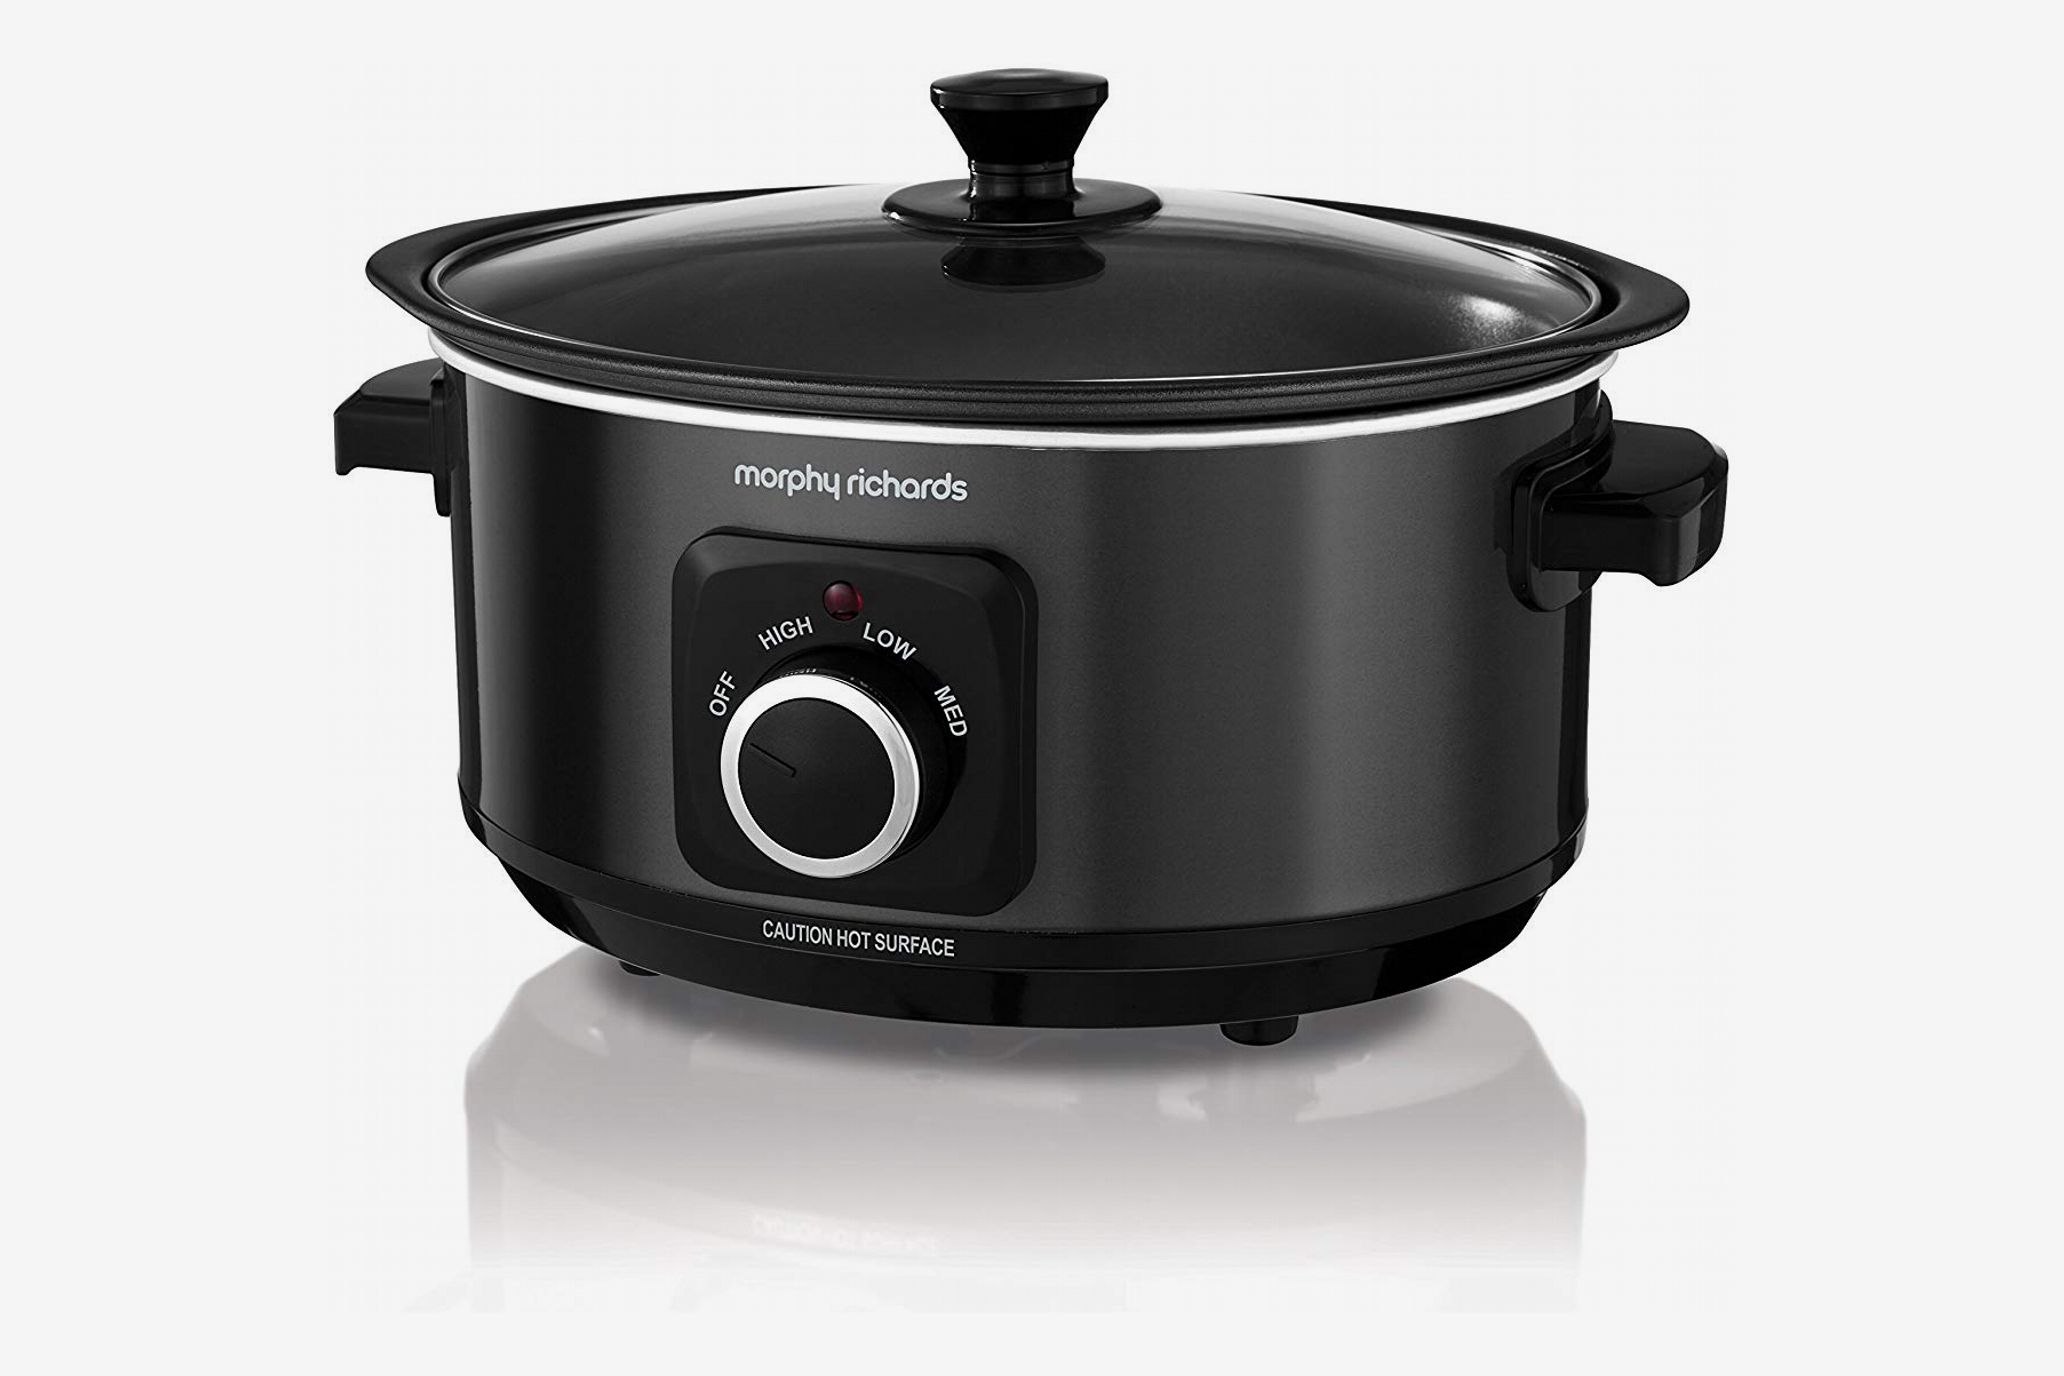 https://pyxis.nymag.com/v1/imgs/60c/e11/782392f821773396d916c08b2912d4e4d3-morphy-richards-slow-cooker-sear-and-ste.jpg